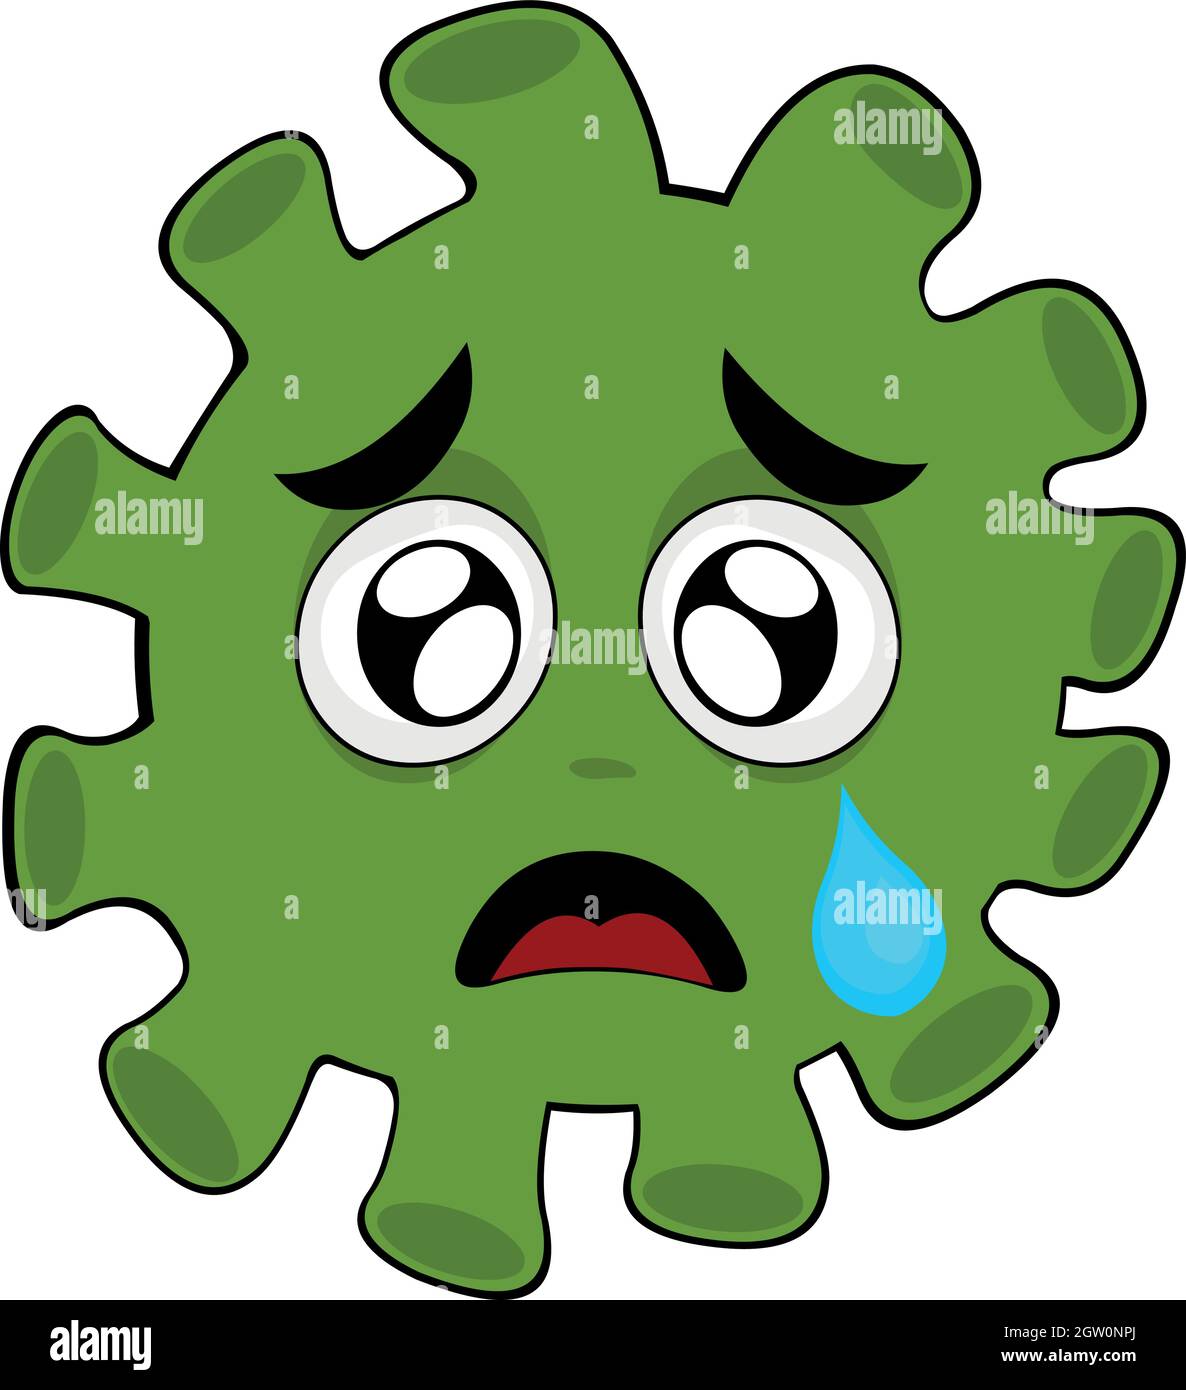 Vector illustration of a virus, bacteria or microbe cartoon character emoticon, with a sad expression and a tear falling from his eye Stock Vector